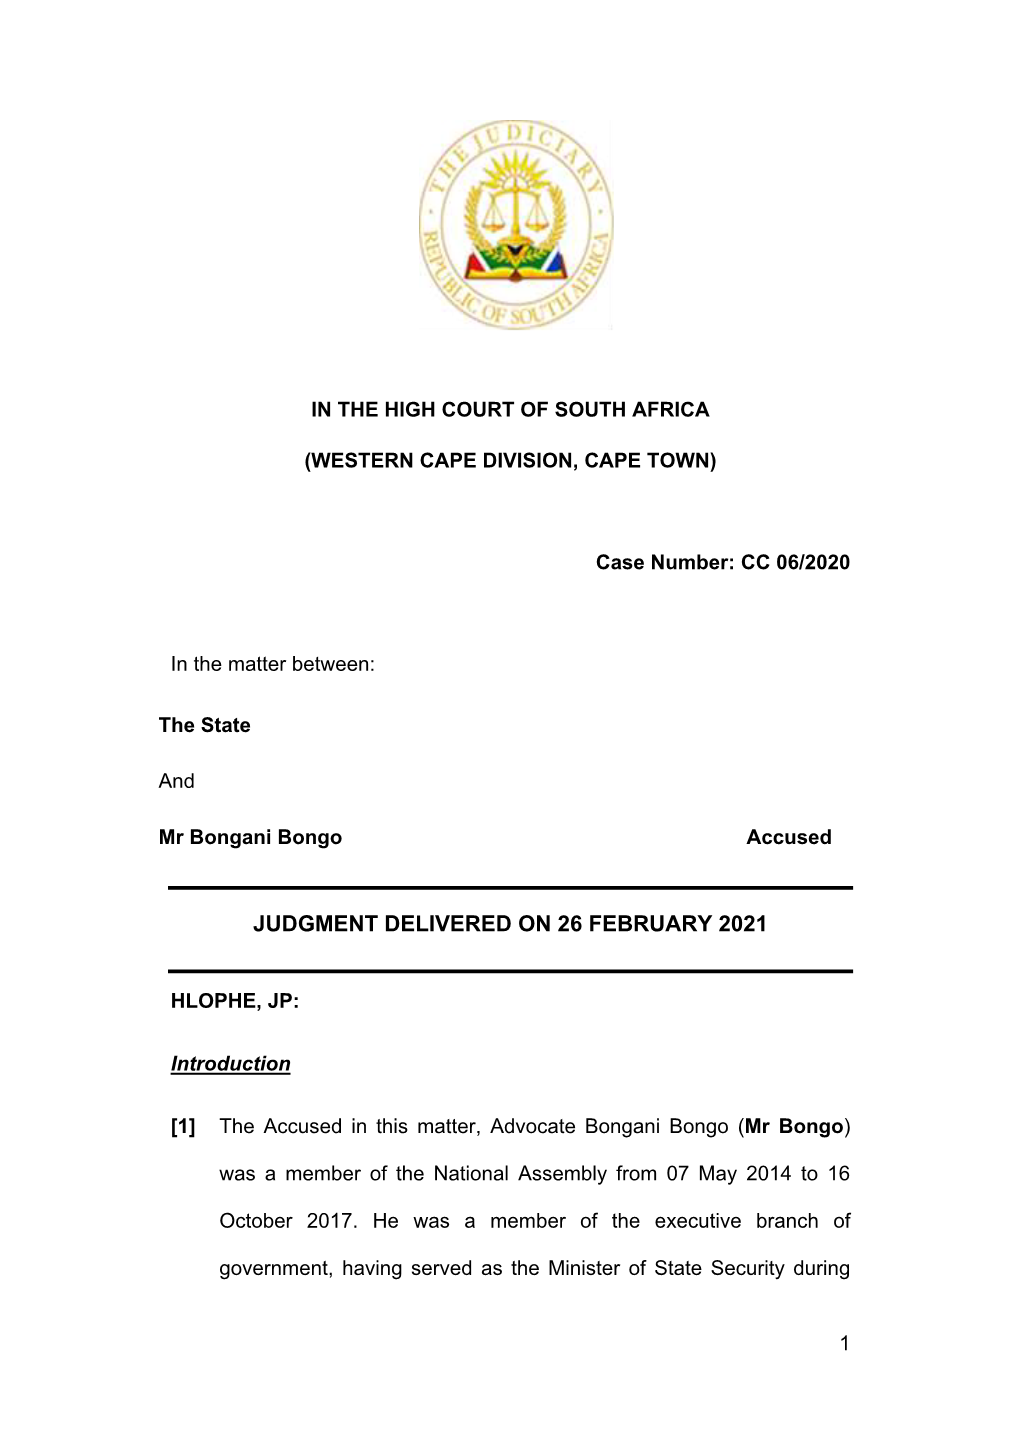 Judgment Delivered on 26 February 2021